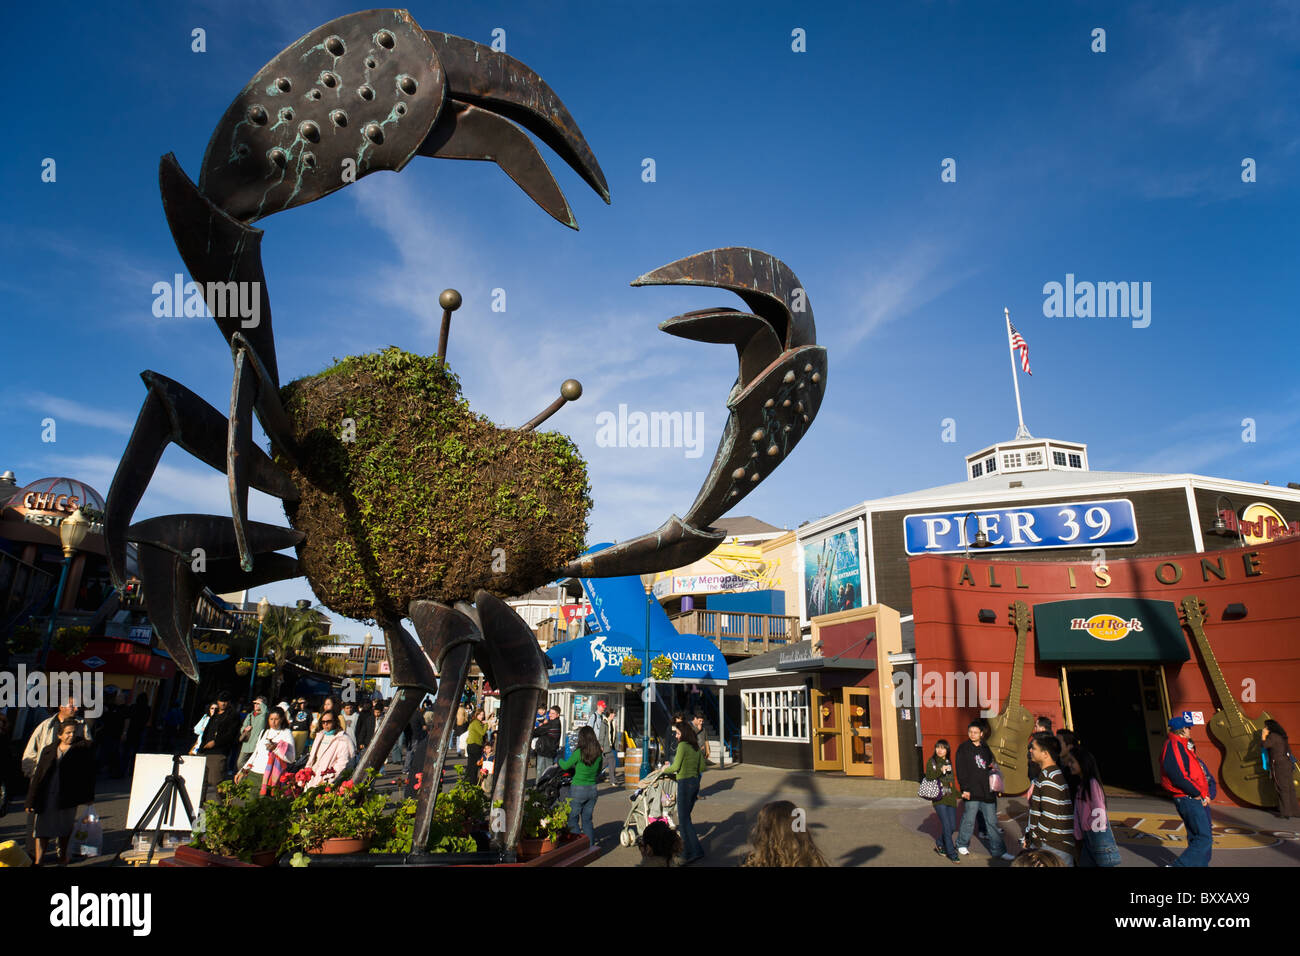 Crab Topiary sculpture at Pier 39, Fisherman's Wharf, San Francisco by Jeff Brees, installed in 2003 Stock Photo